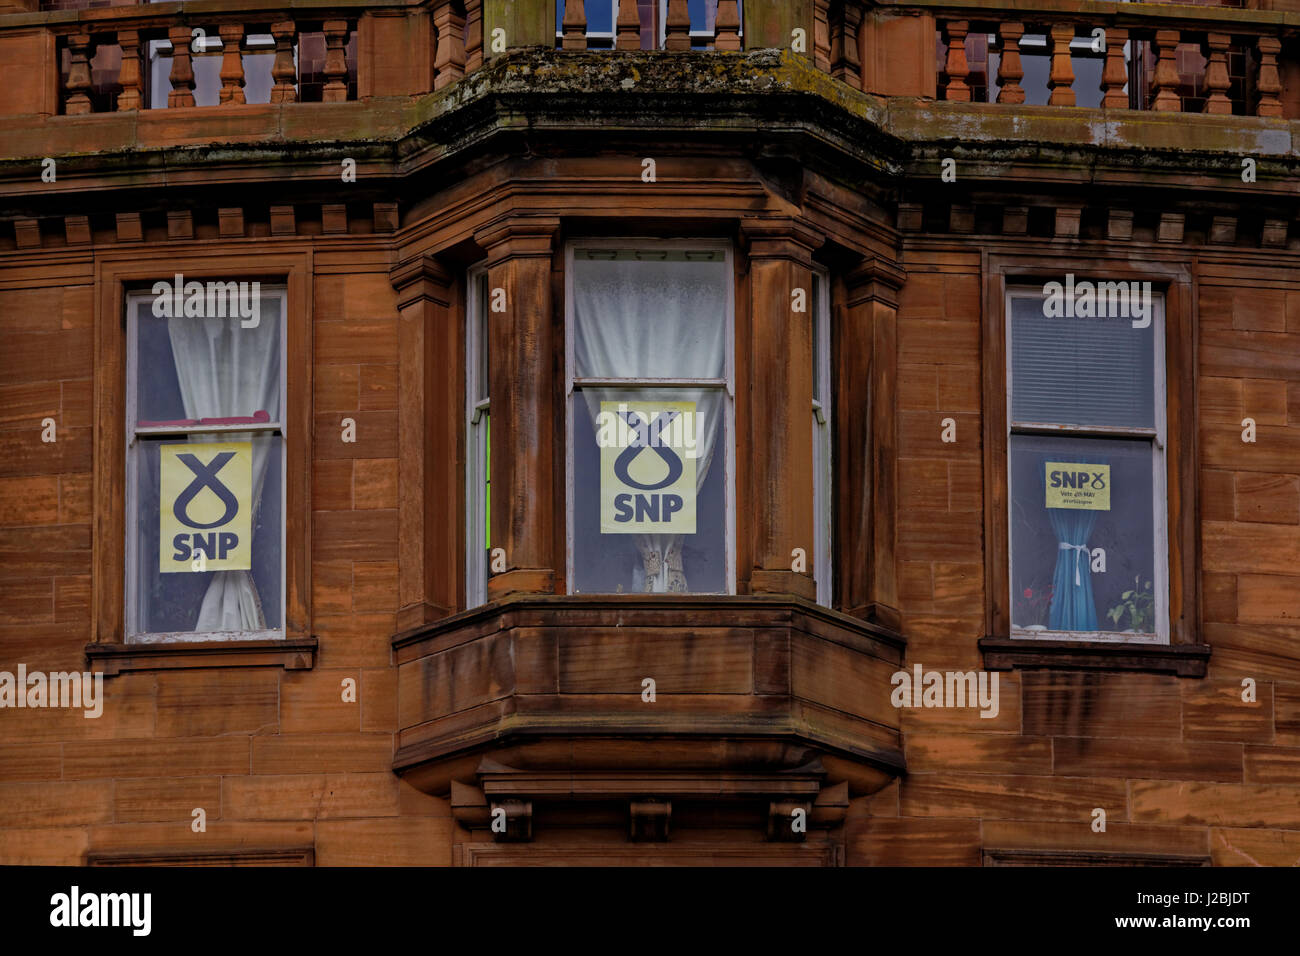 SNP snp Scottish nationalist party logo posters in very upmarket middle class window Stock Photo